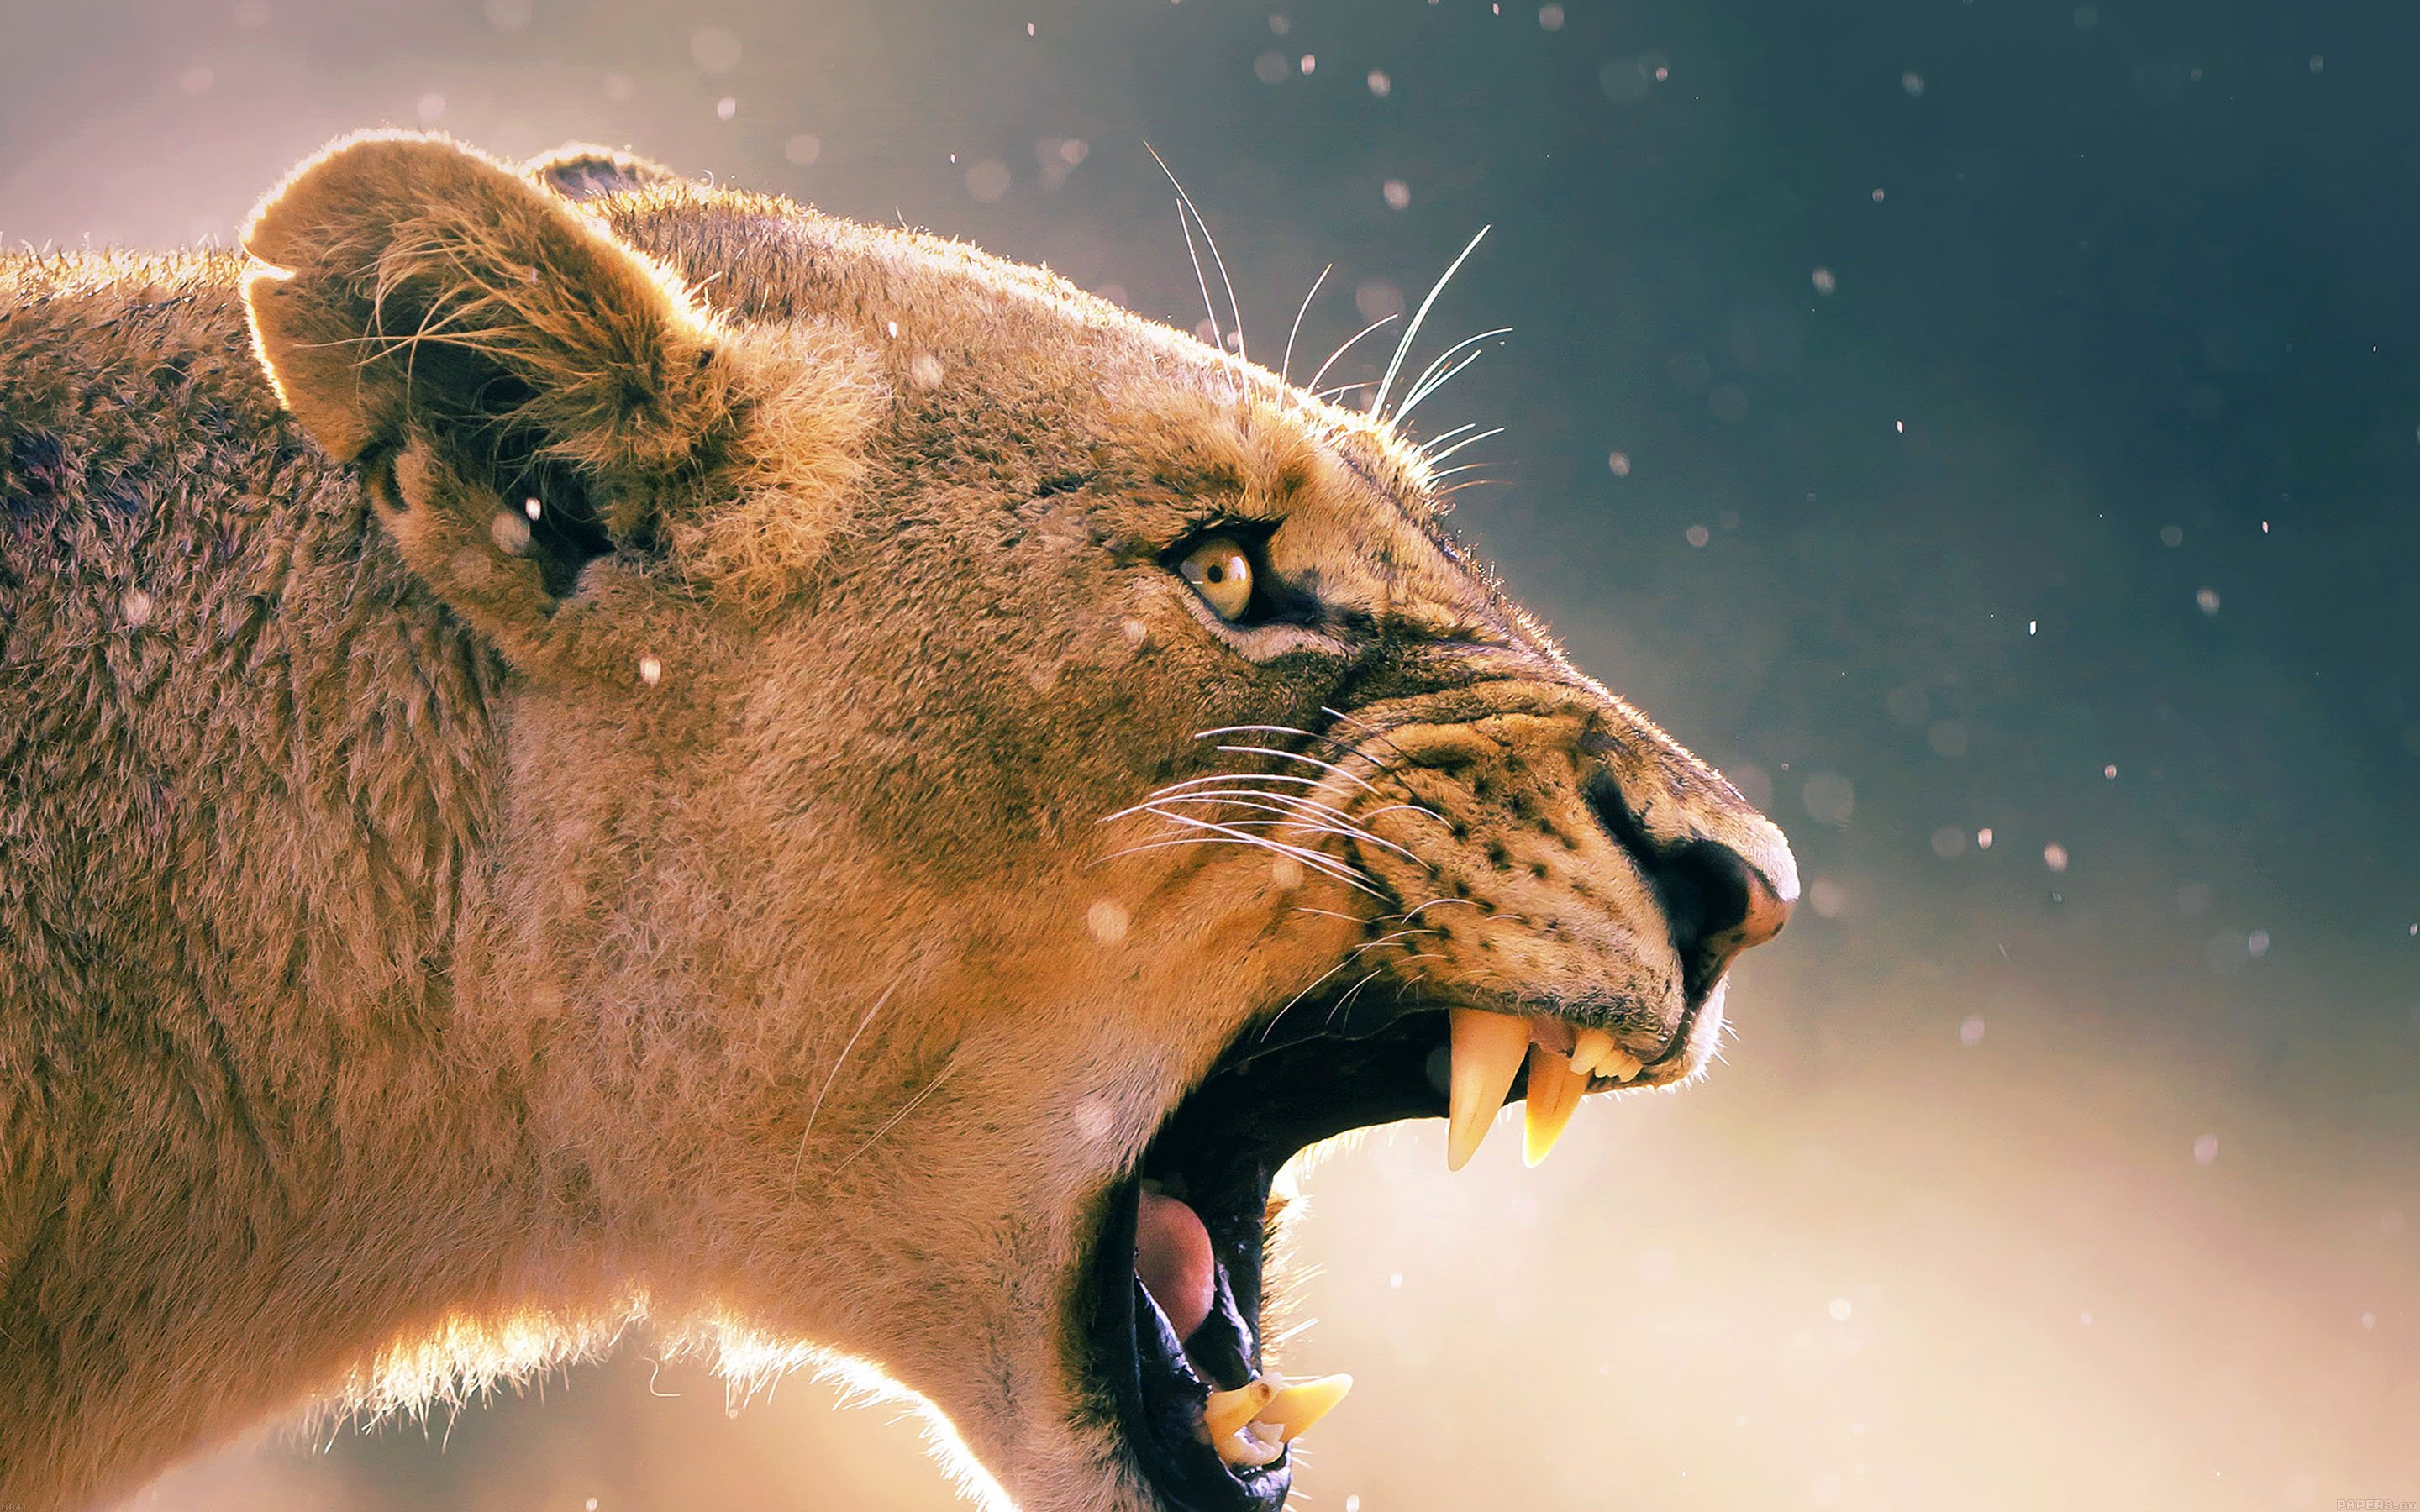 Angry Animal Female Lion Hd Desktop Backgrounds Free Download 2880x1800